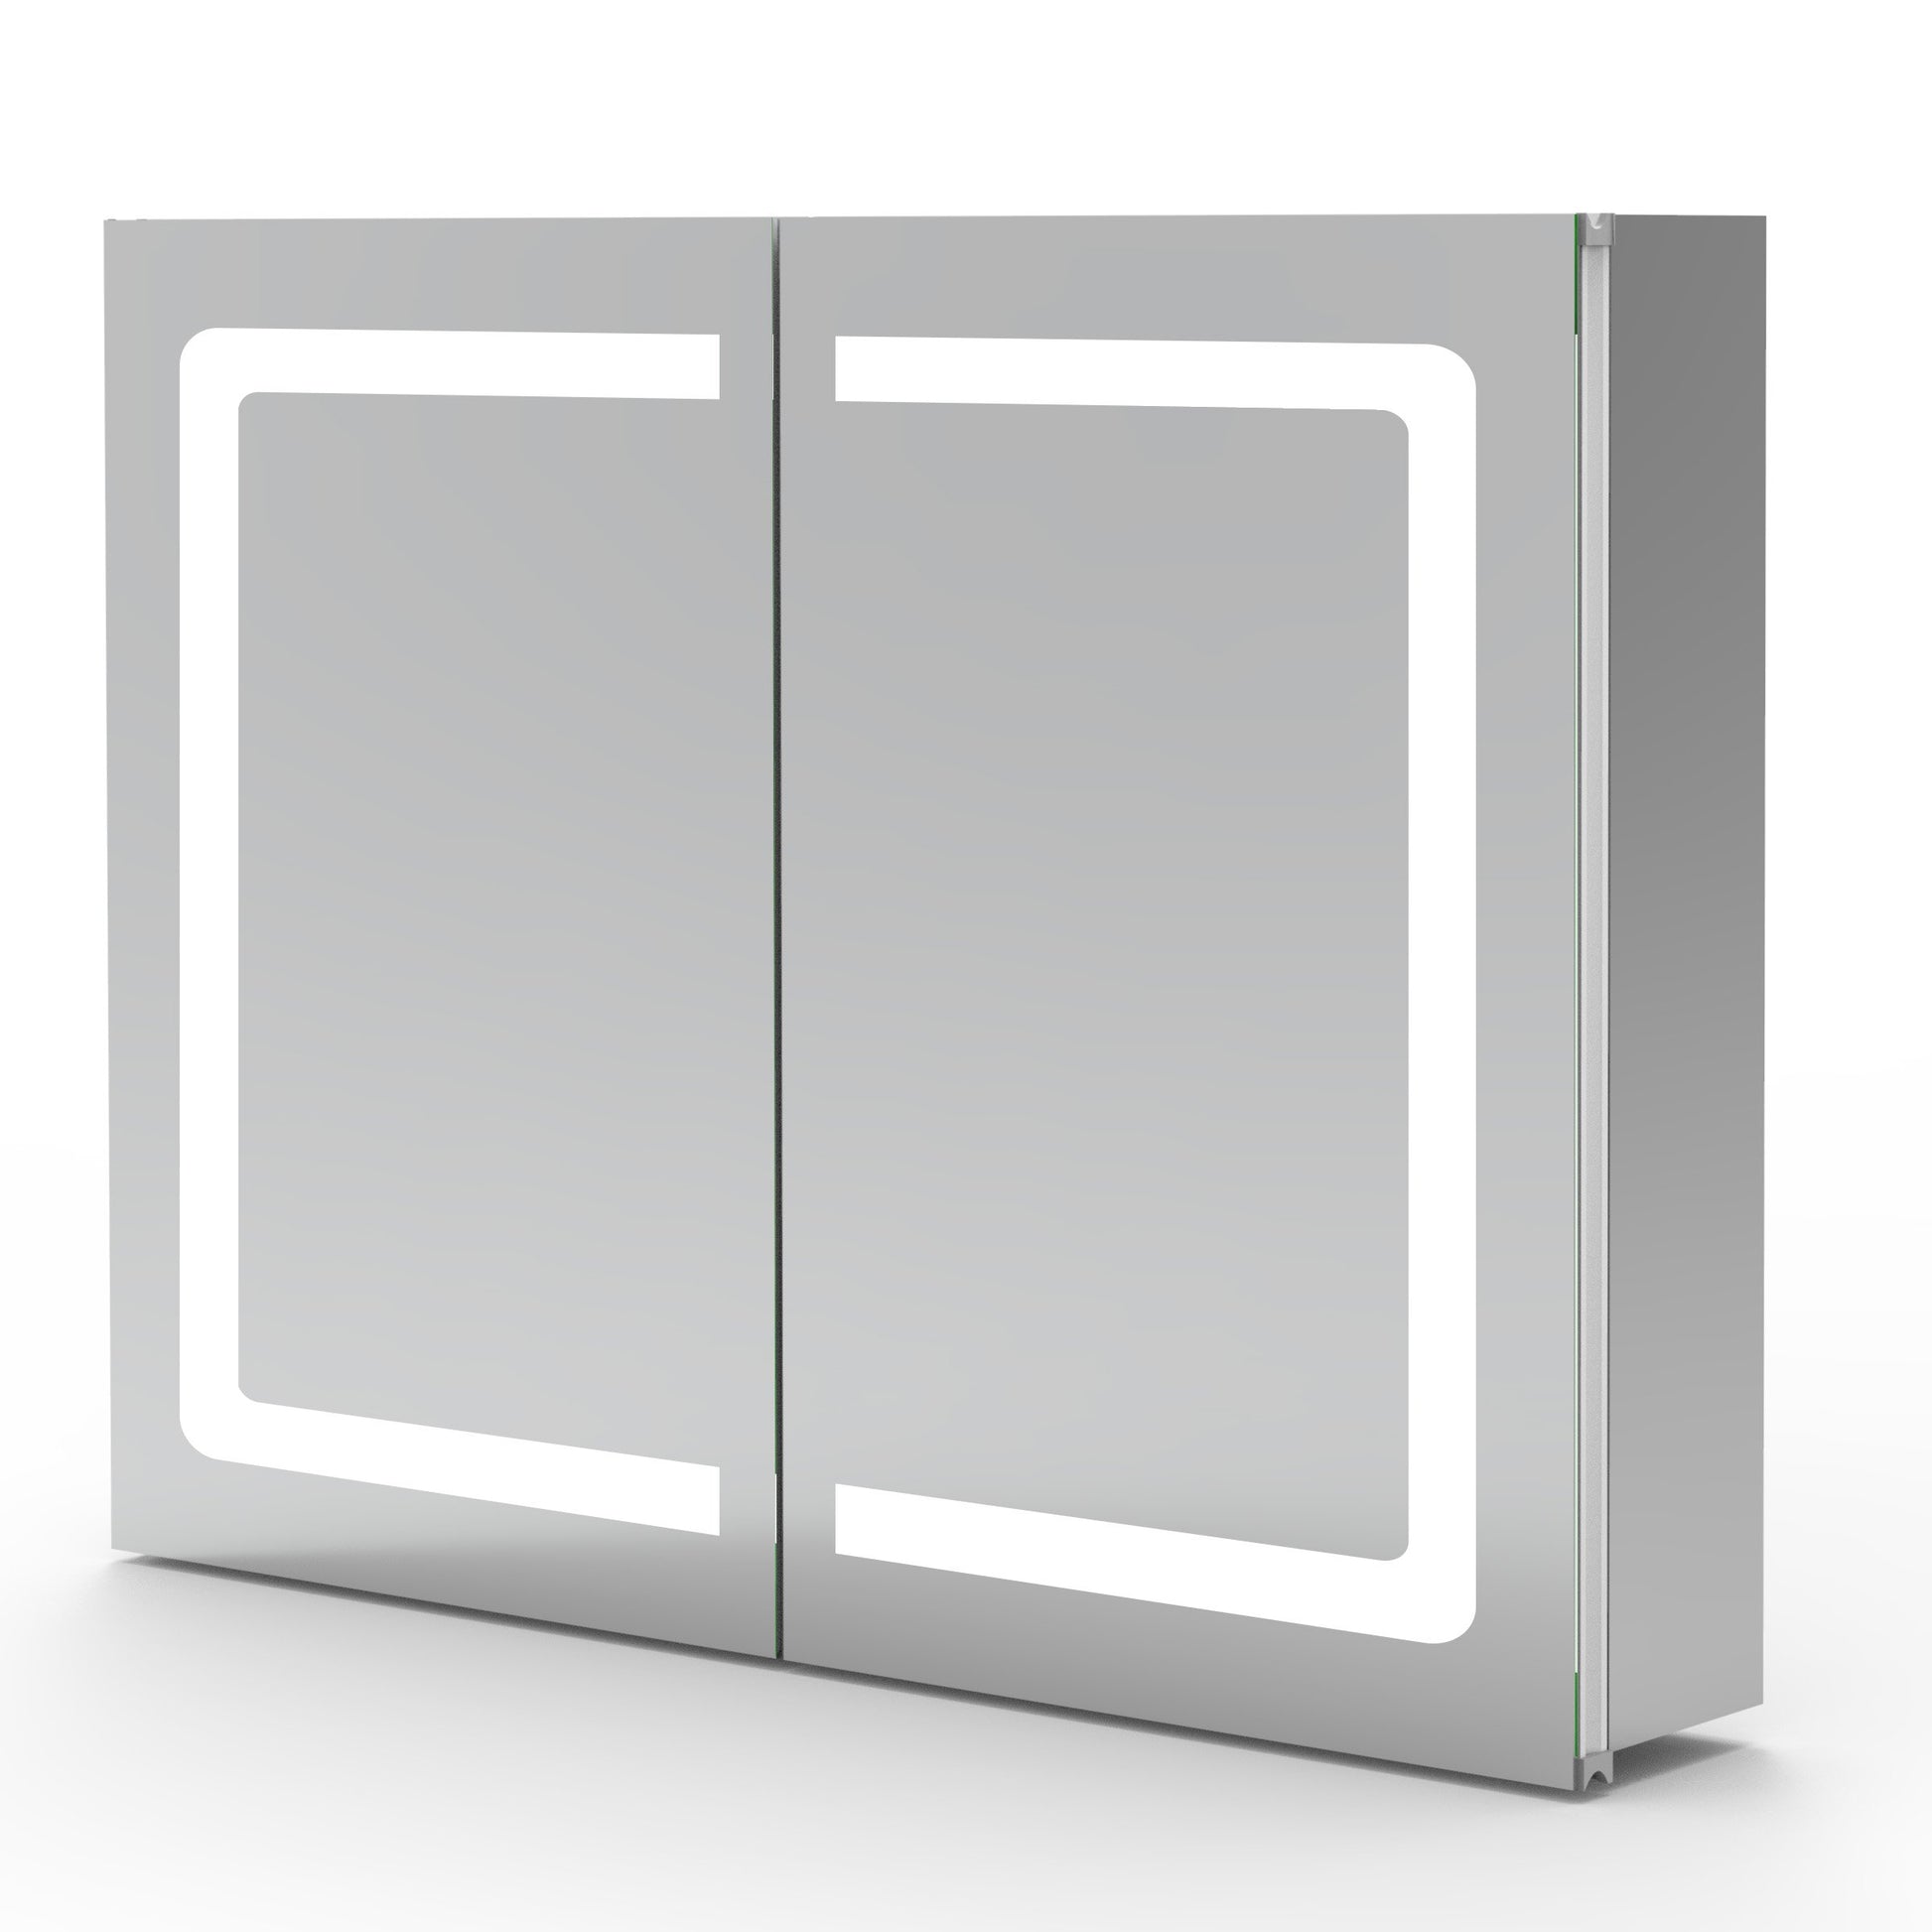 800 x 600 Demister Bathroom Mirror Cabinet with Lights and Socket